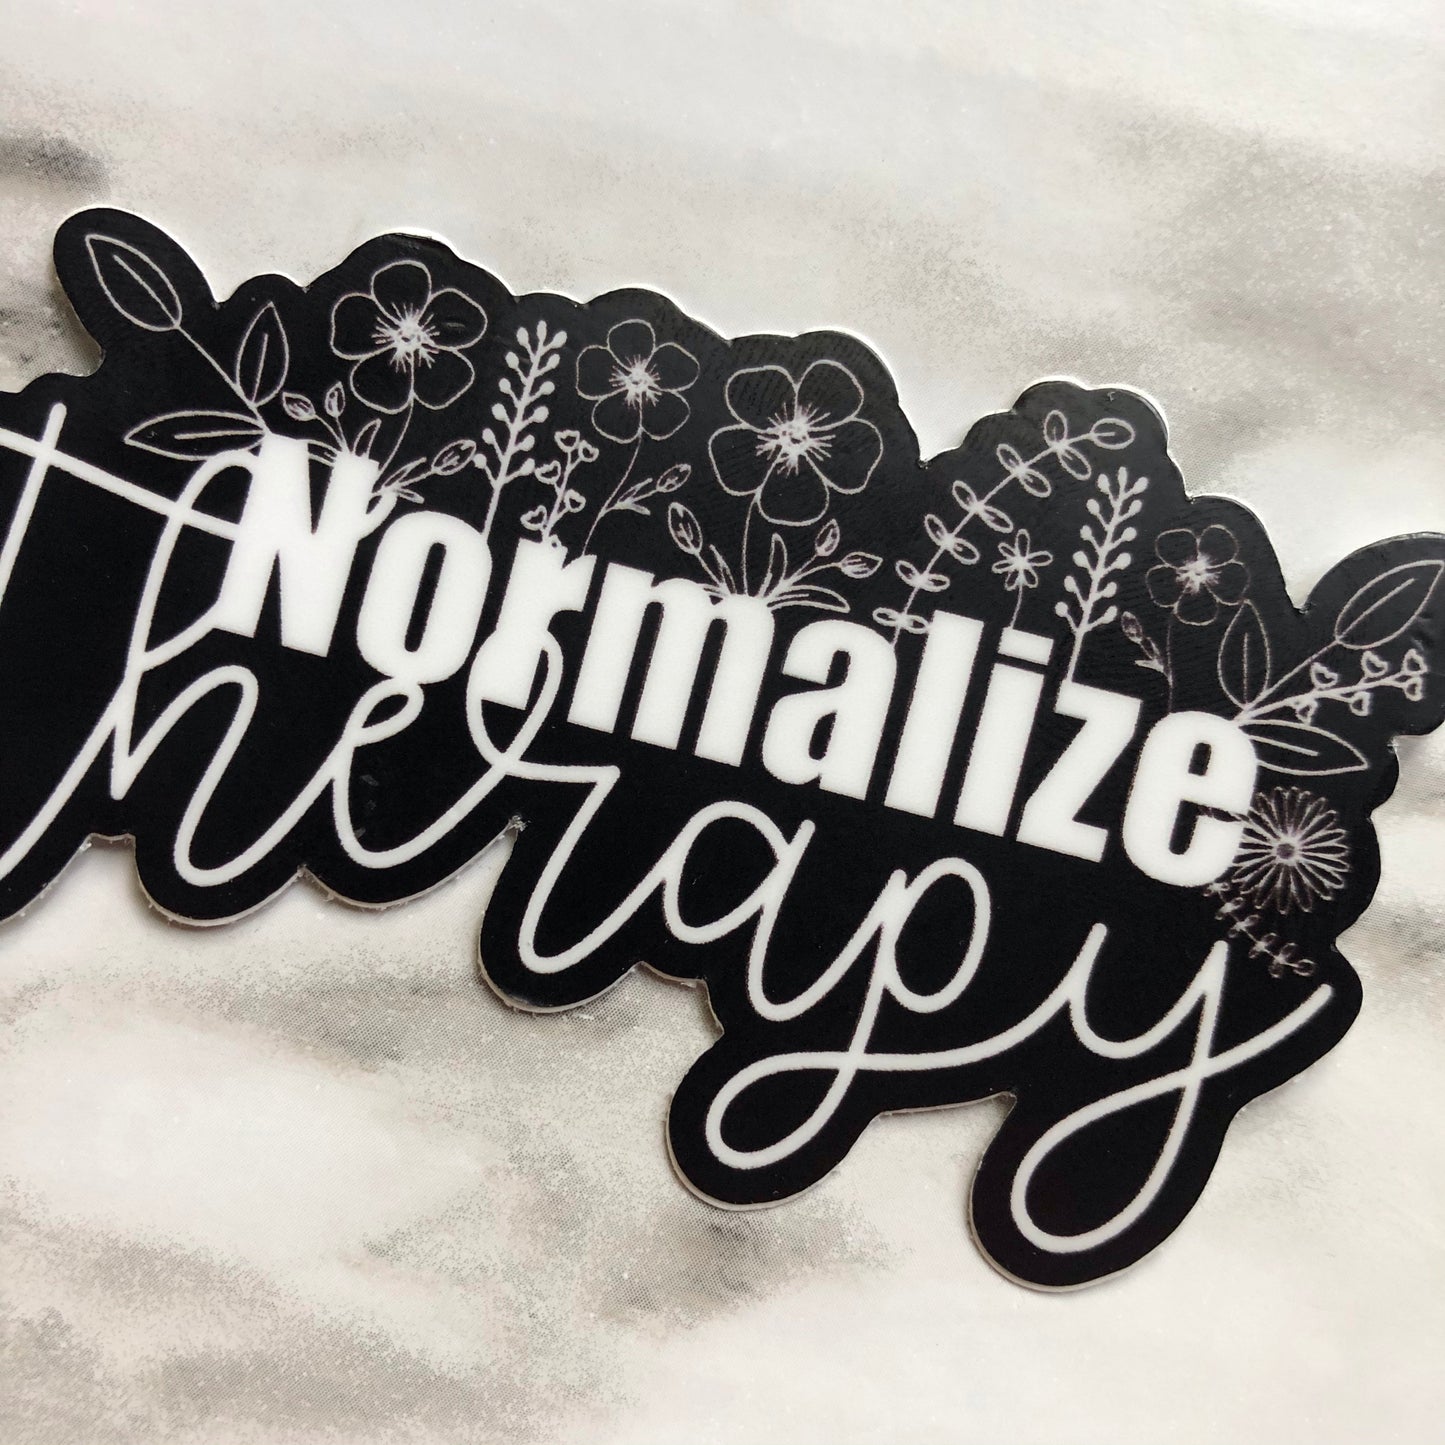 Normalize Therapy Floral Black and White Vinyl Sticker